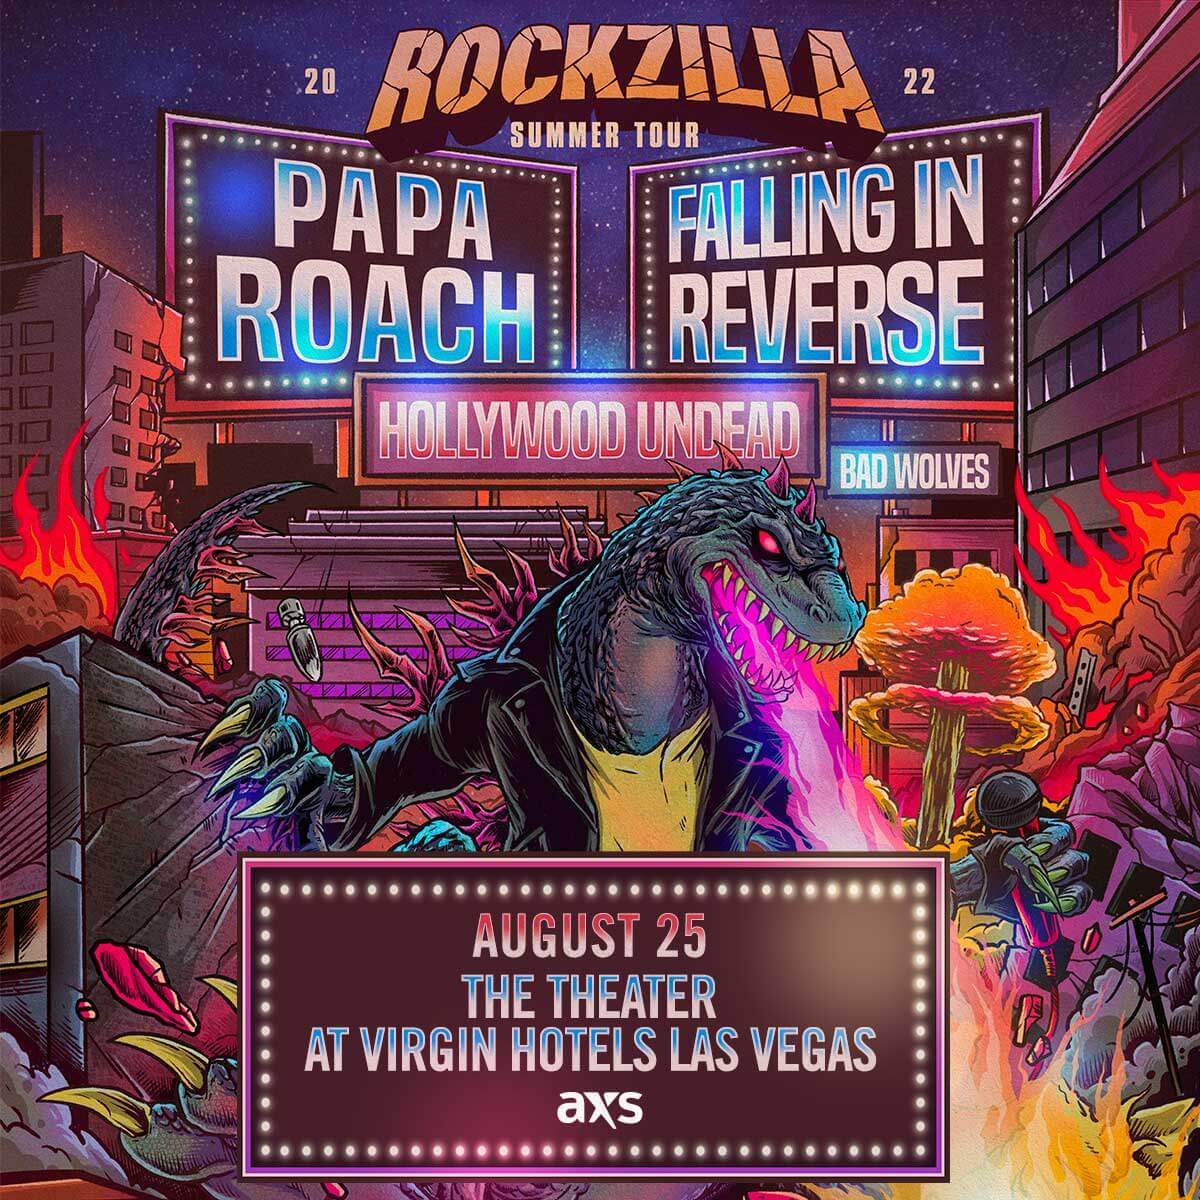 PAPA ROACH & FALLING IN REVERSELive at The Theater at Virgin Hotels Las Vegas